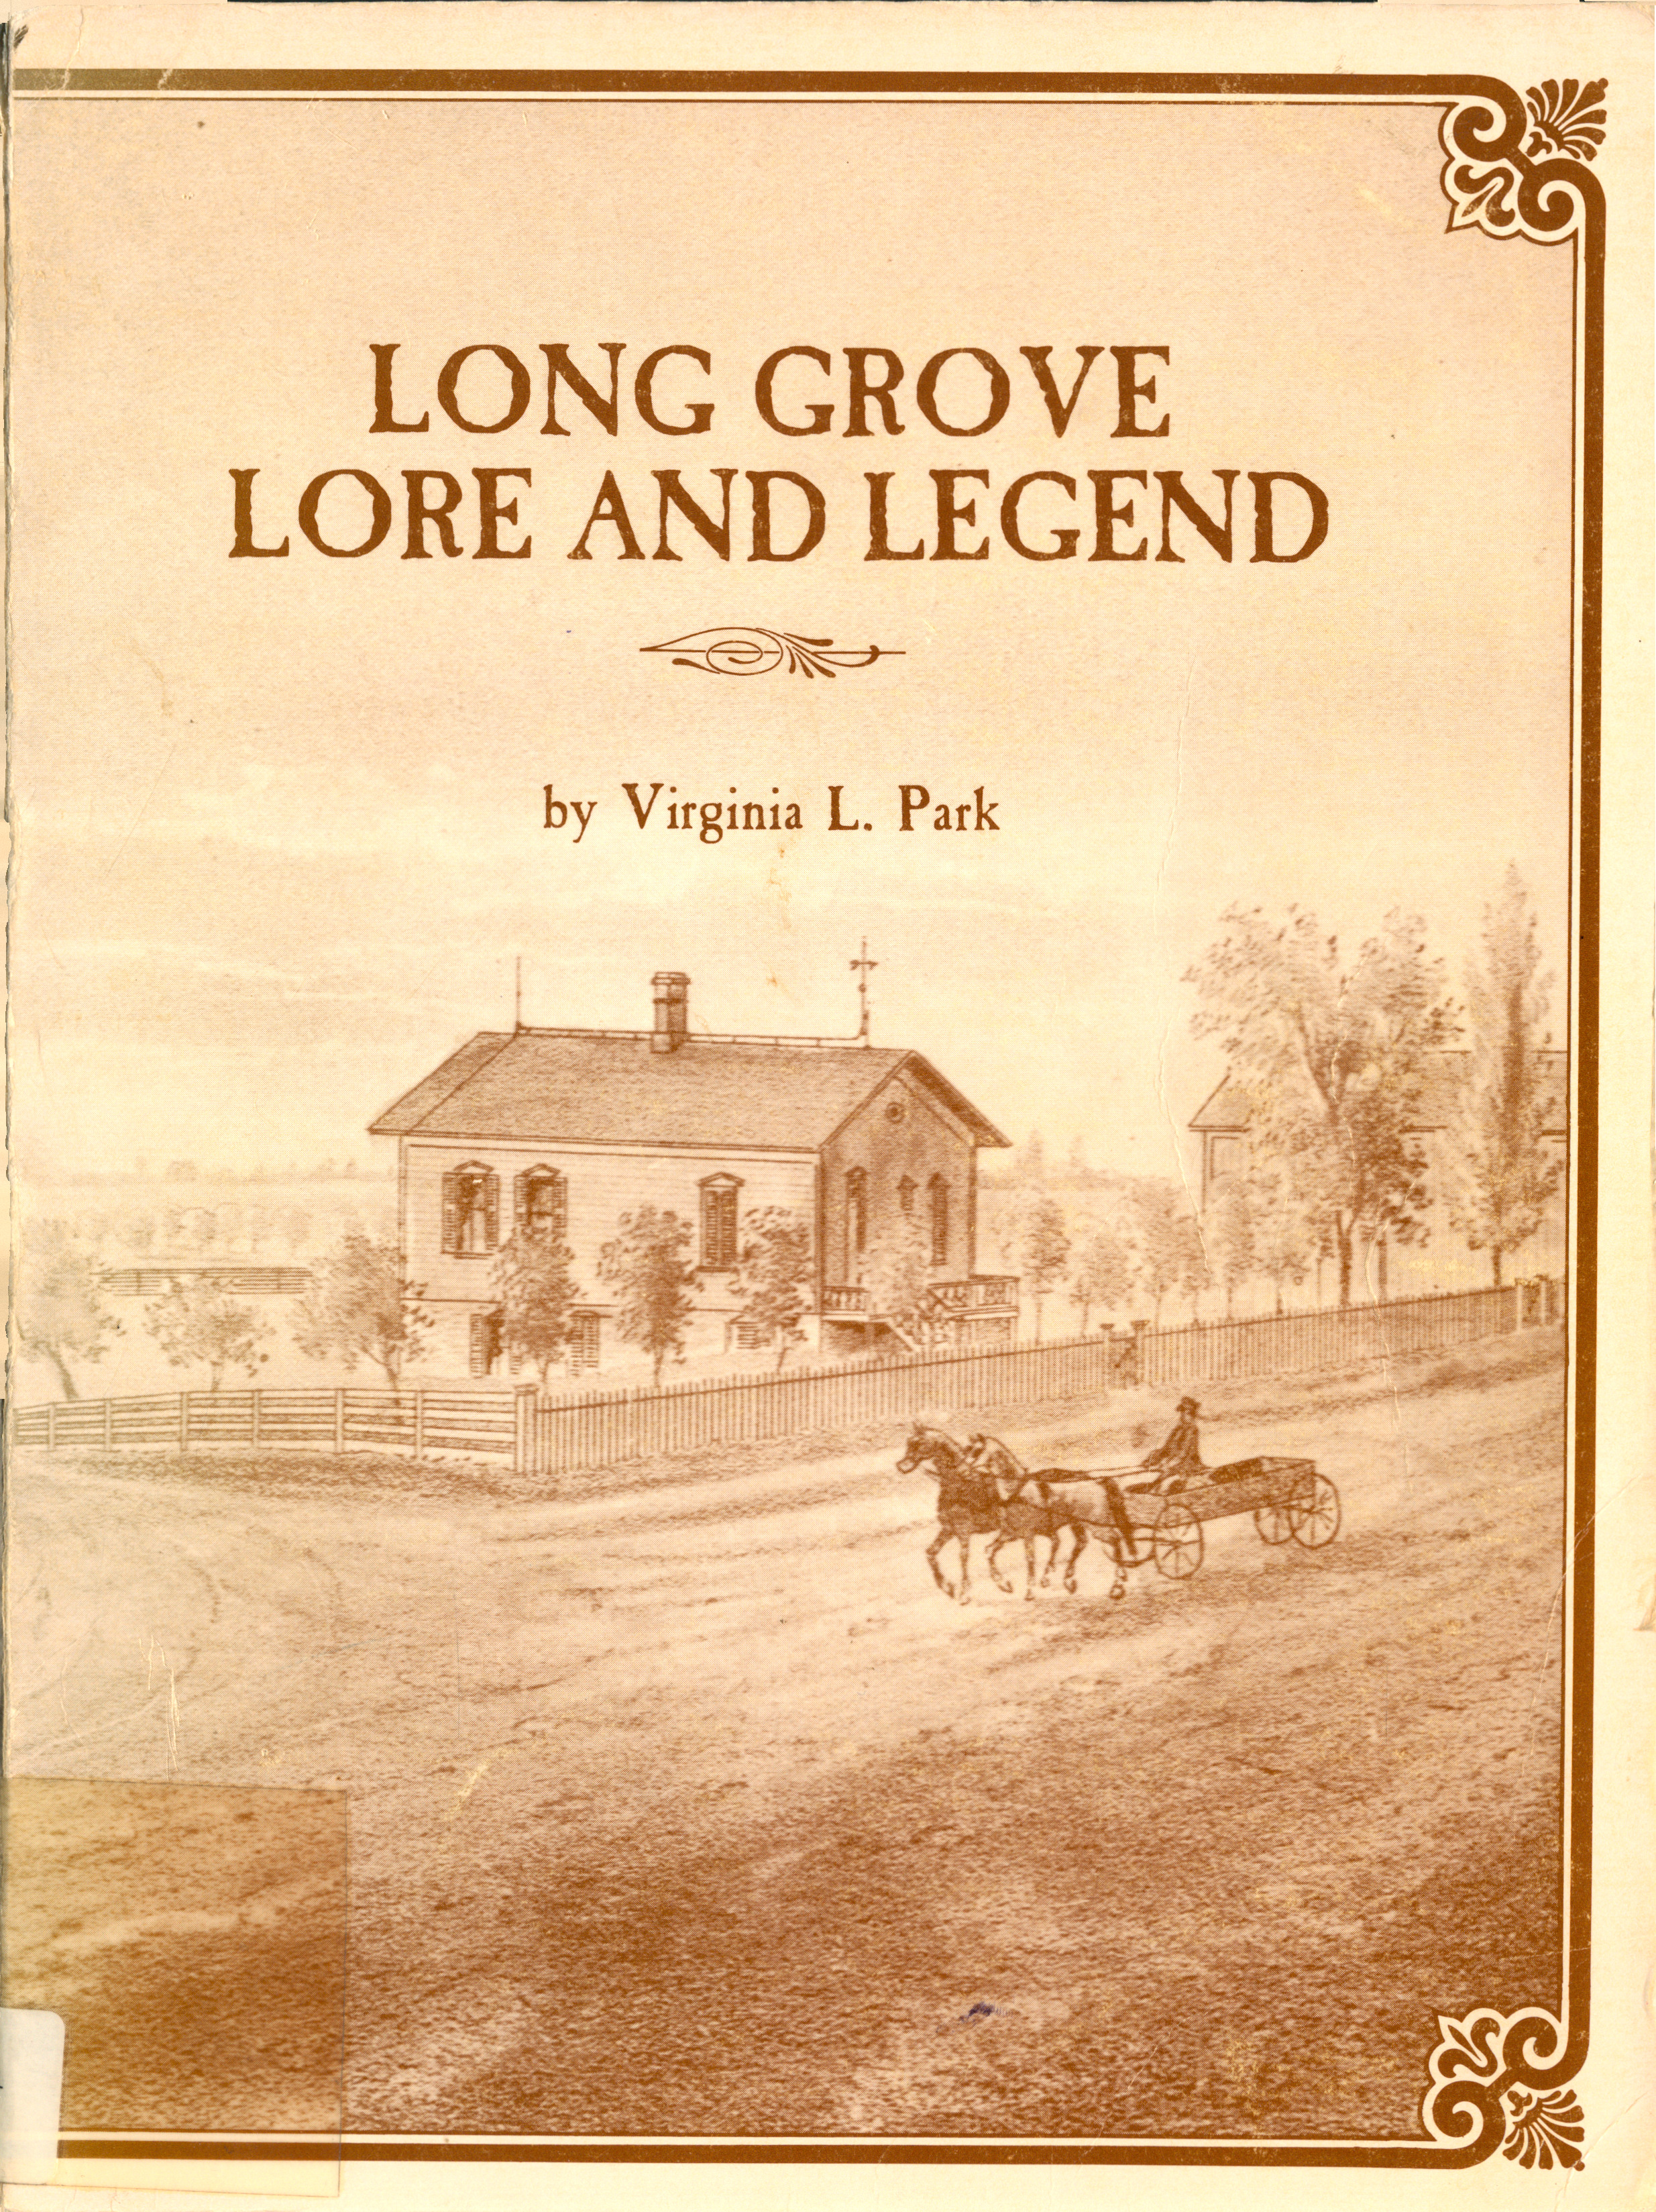 Image for "Long Grove Lore and Legend"